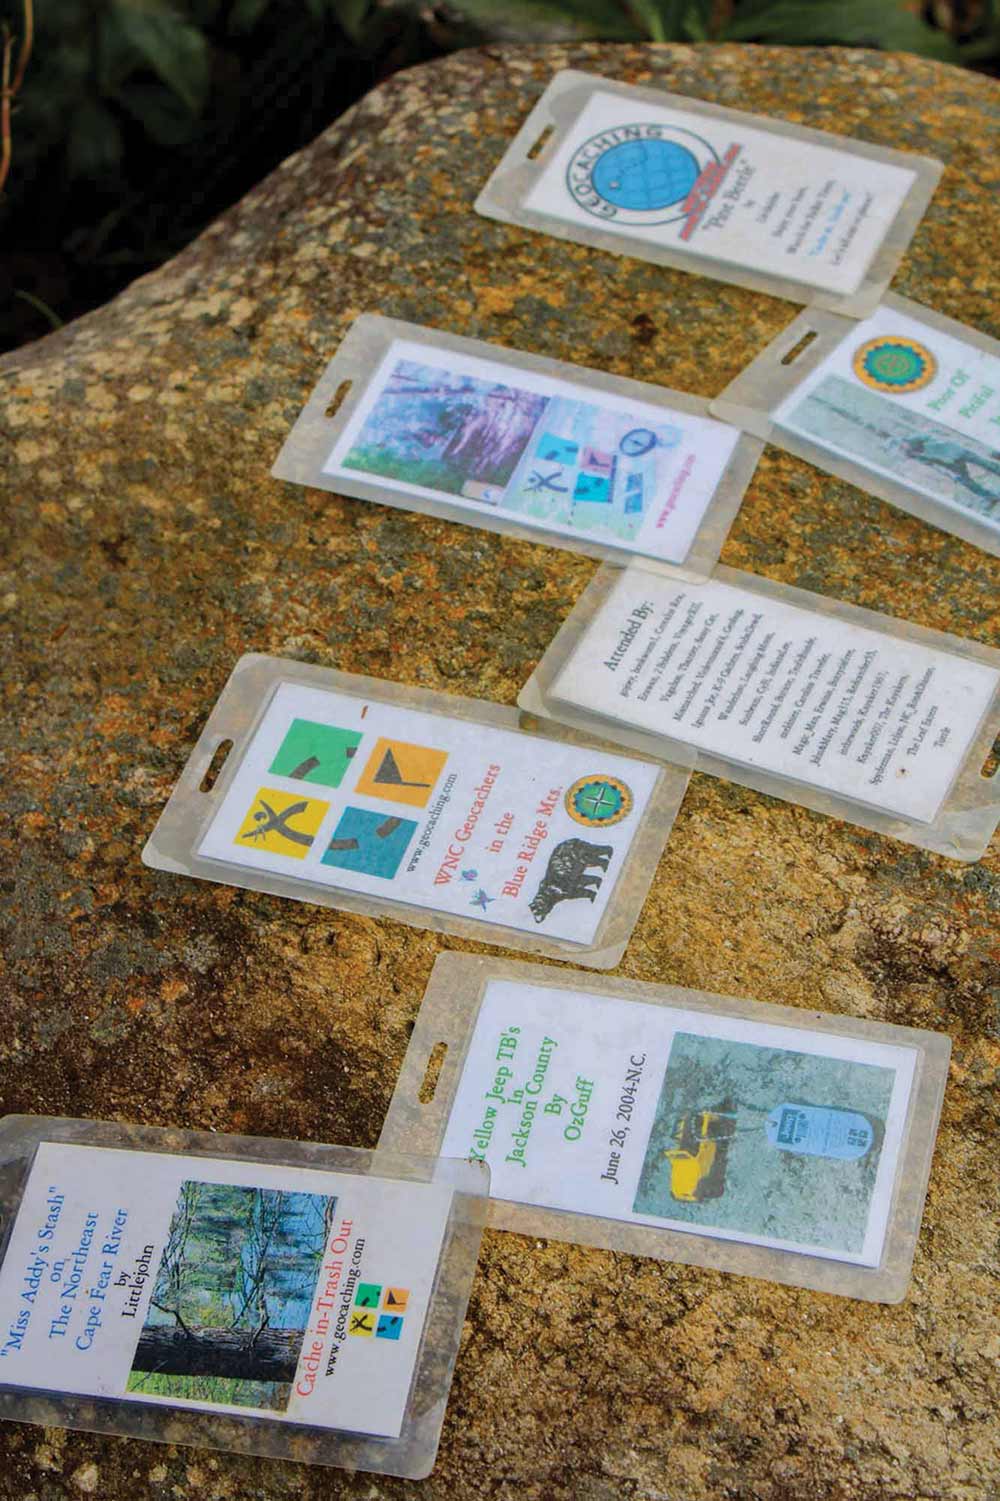 These laminated cards have captions and colorful pictures to congratulate cachers on their finds.